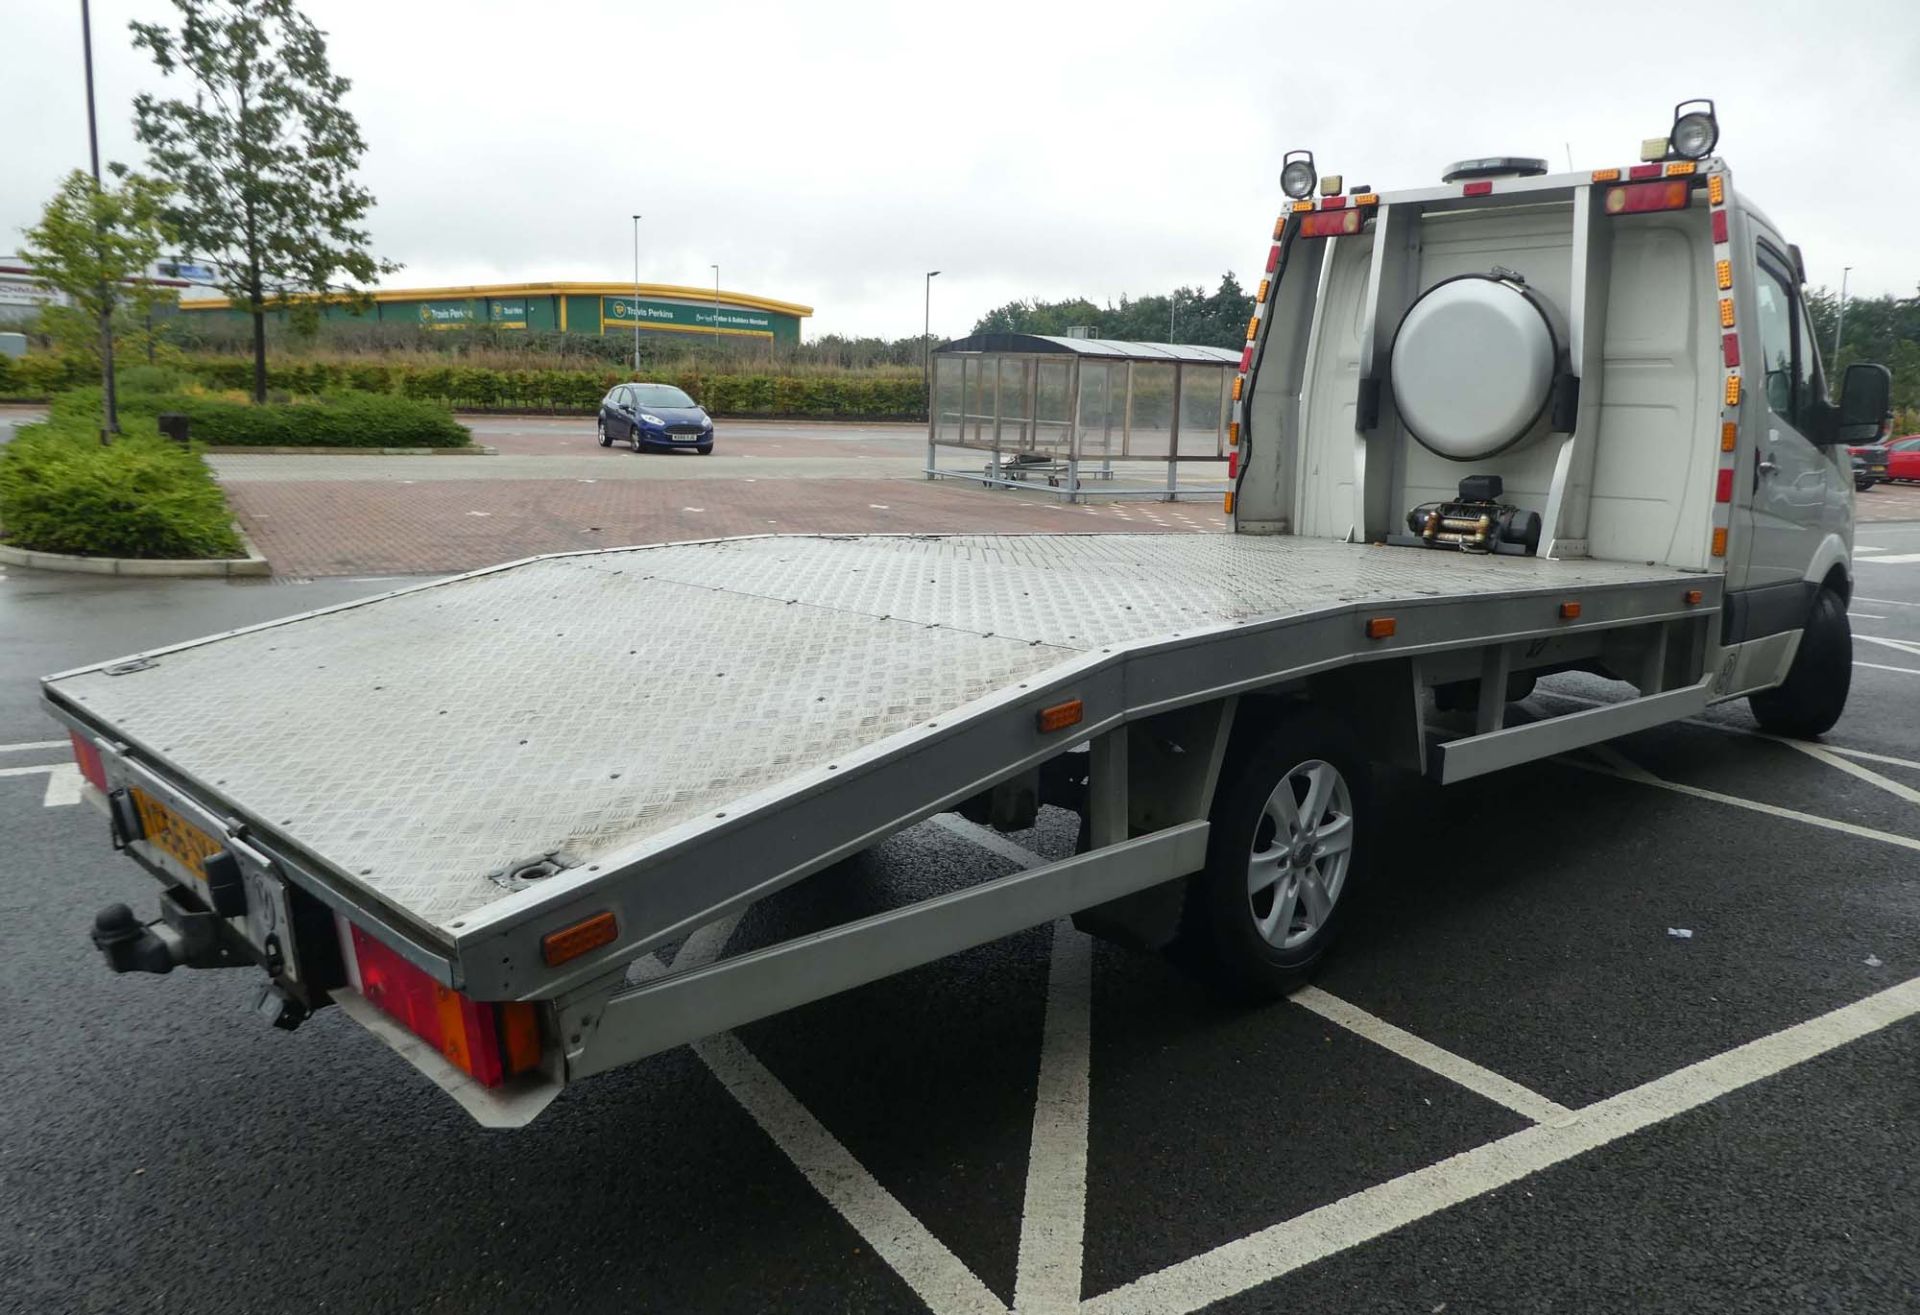 Volkswagen Crafter CR35 109 LWB recovery vehicle with AF Recovery aluminium 5 metre beavertail body, - Image 9 of 13